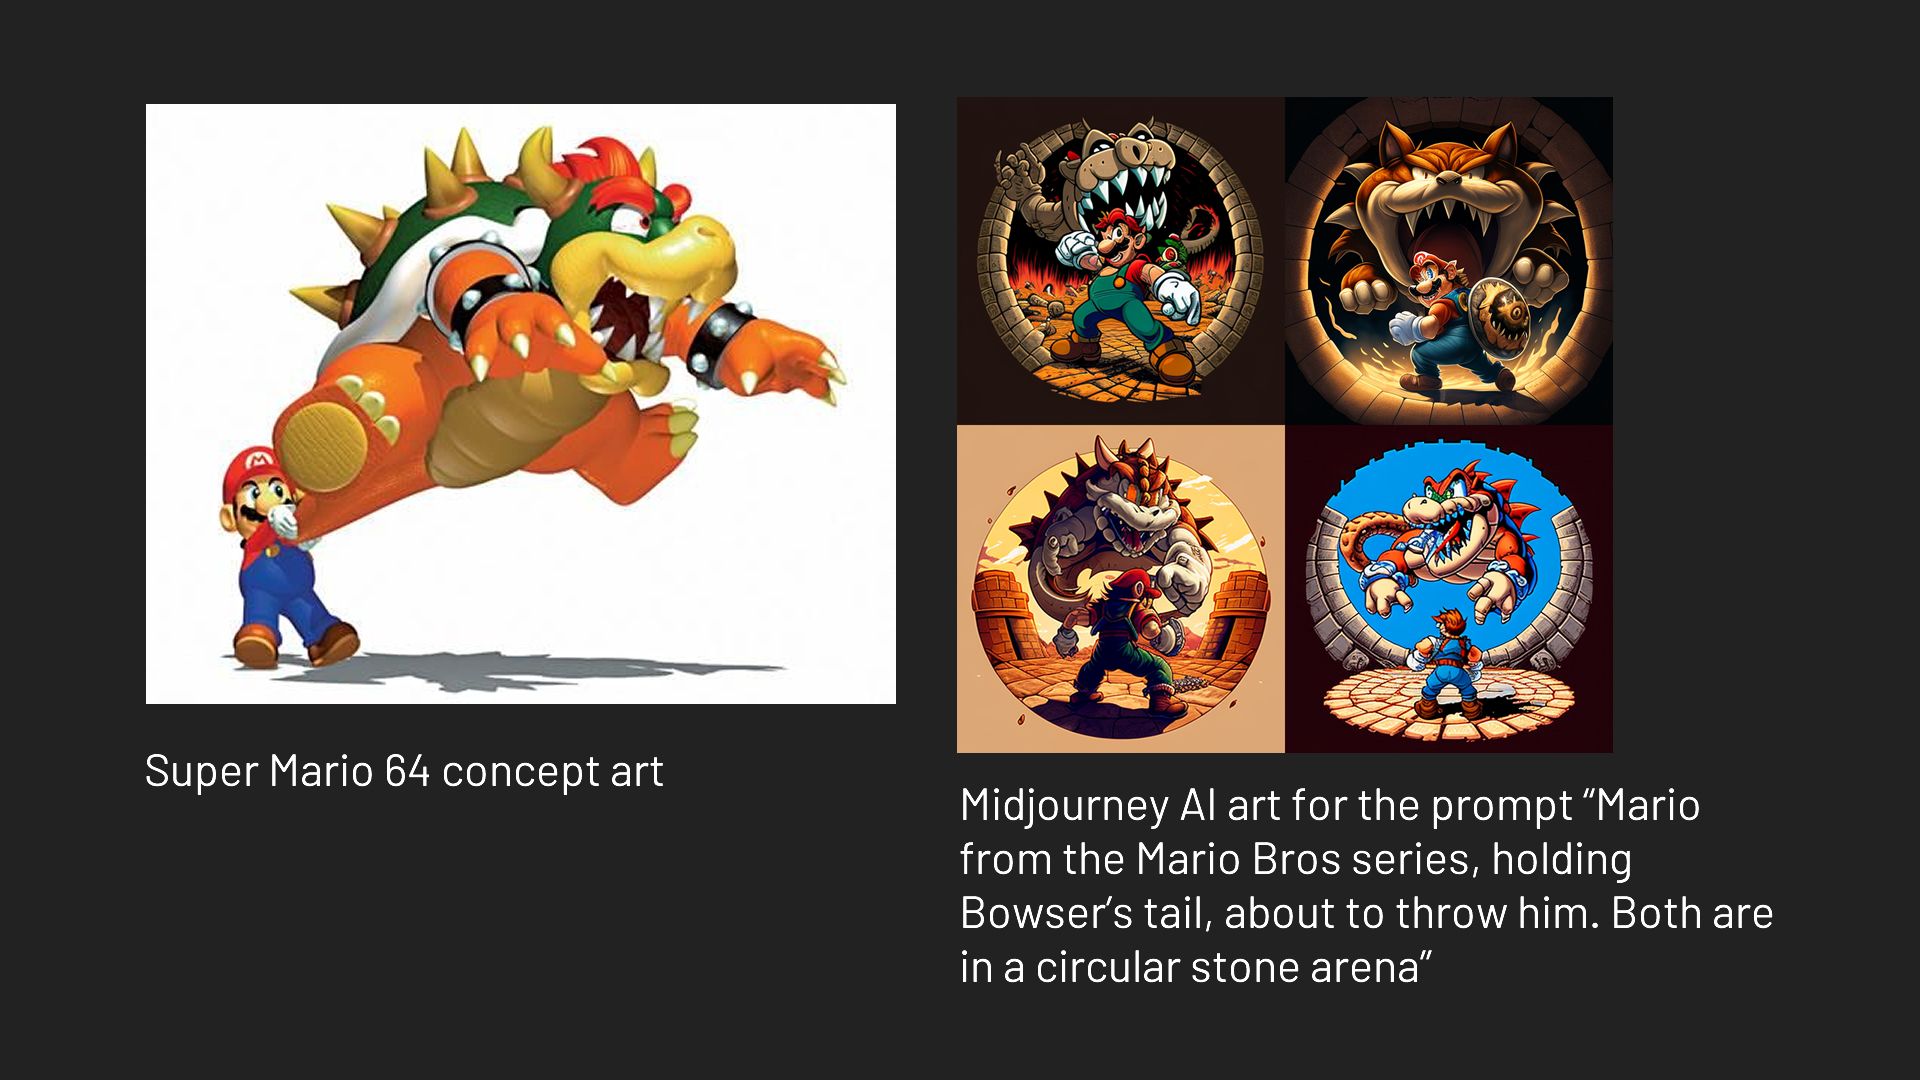 A picture of AI art vs human art, with more complex actions - a picture of Mario fighting Bowser